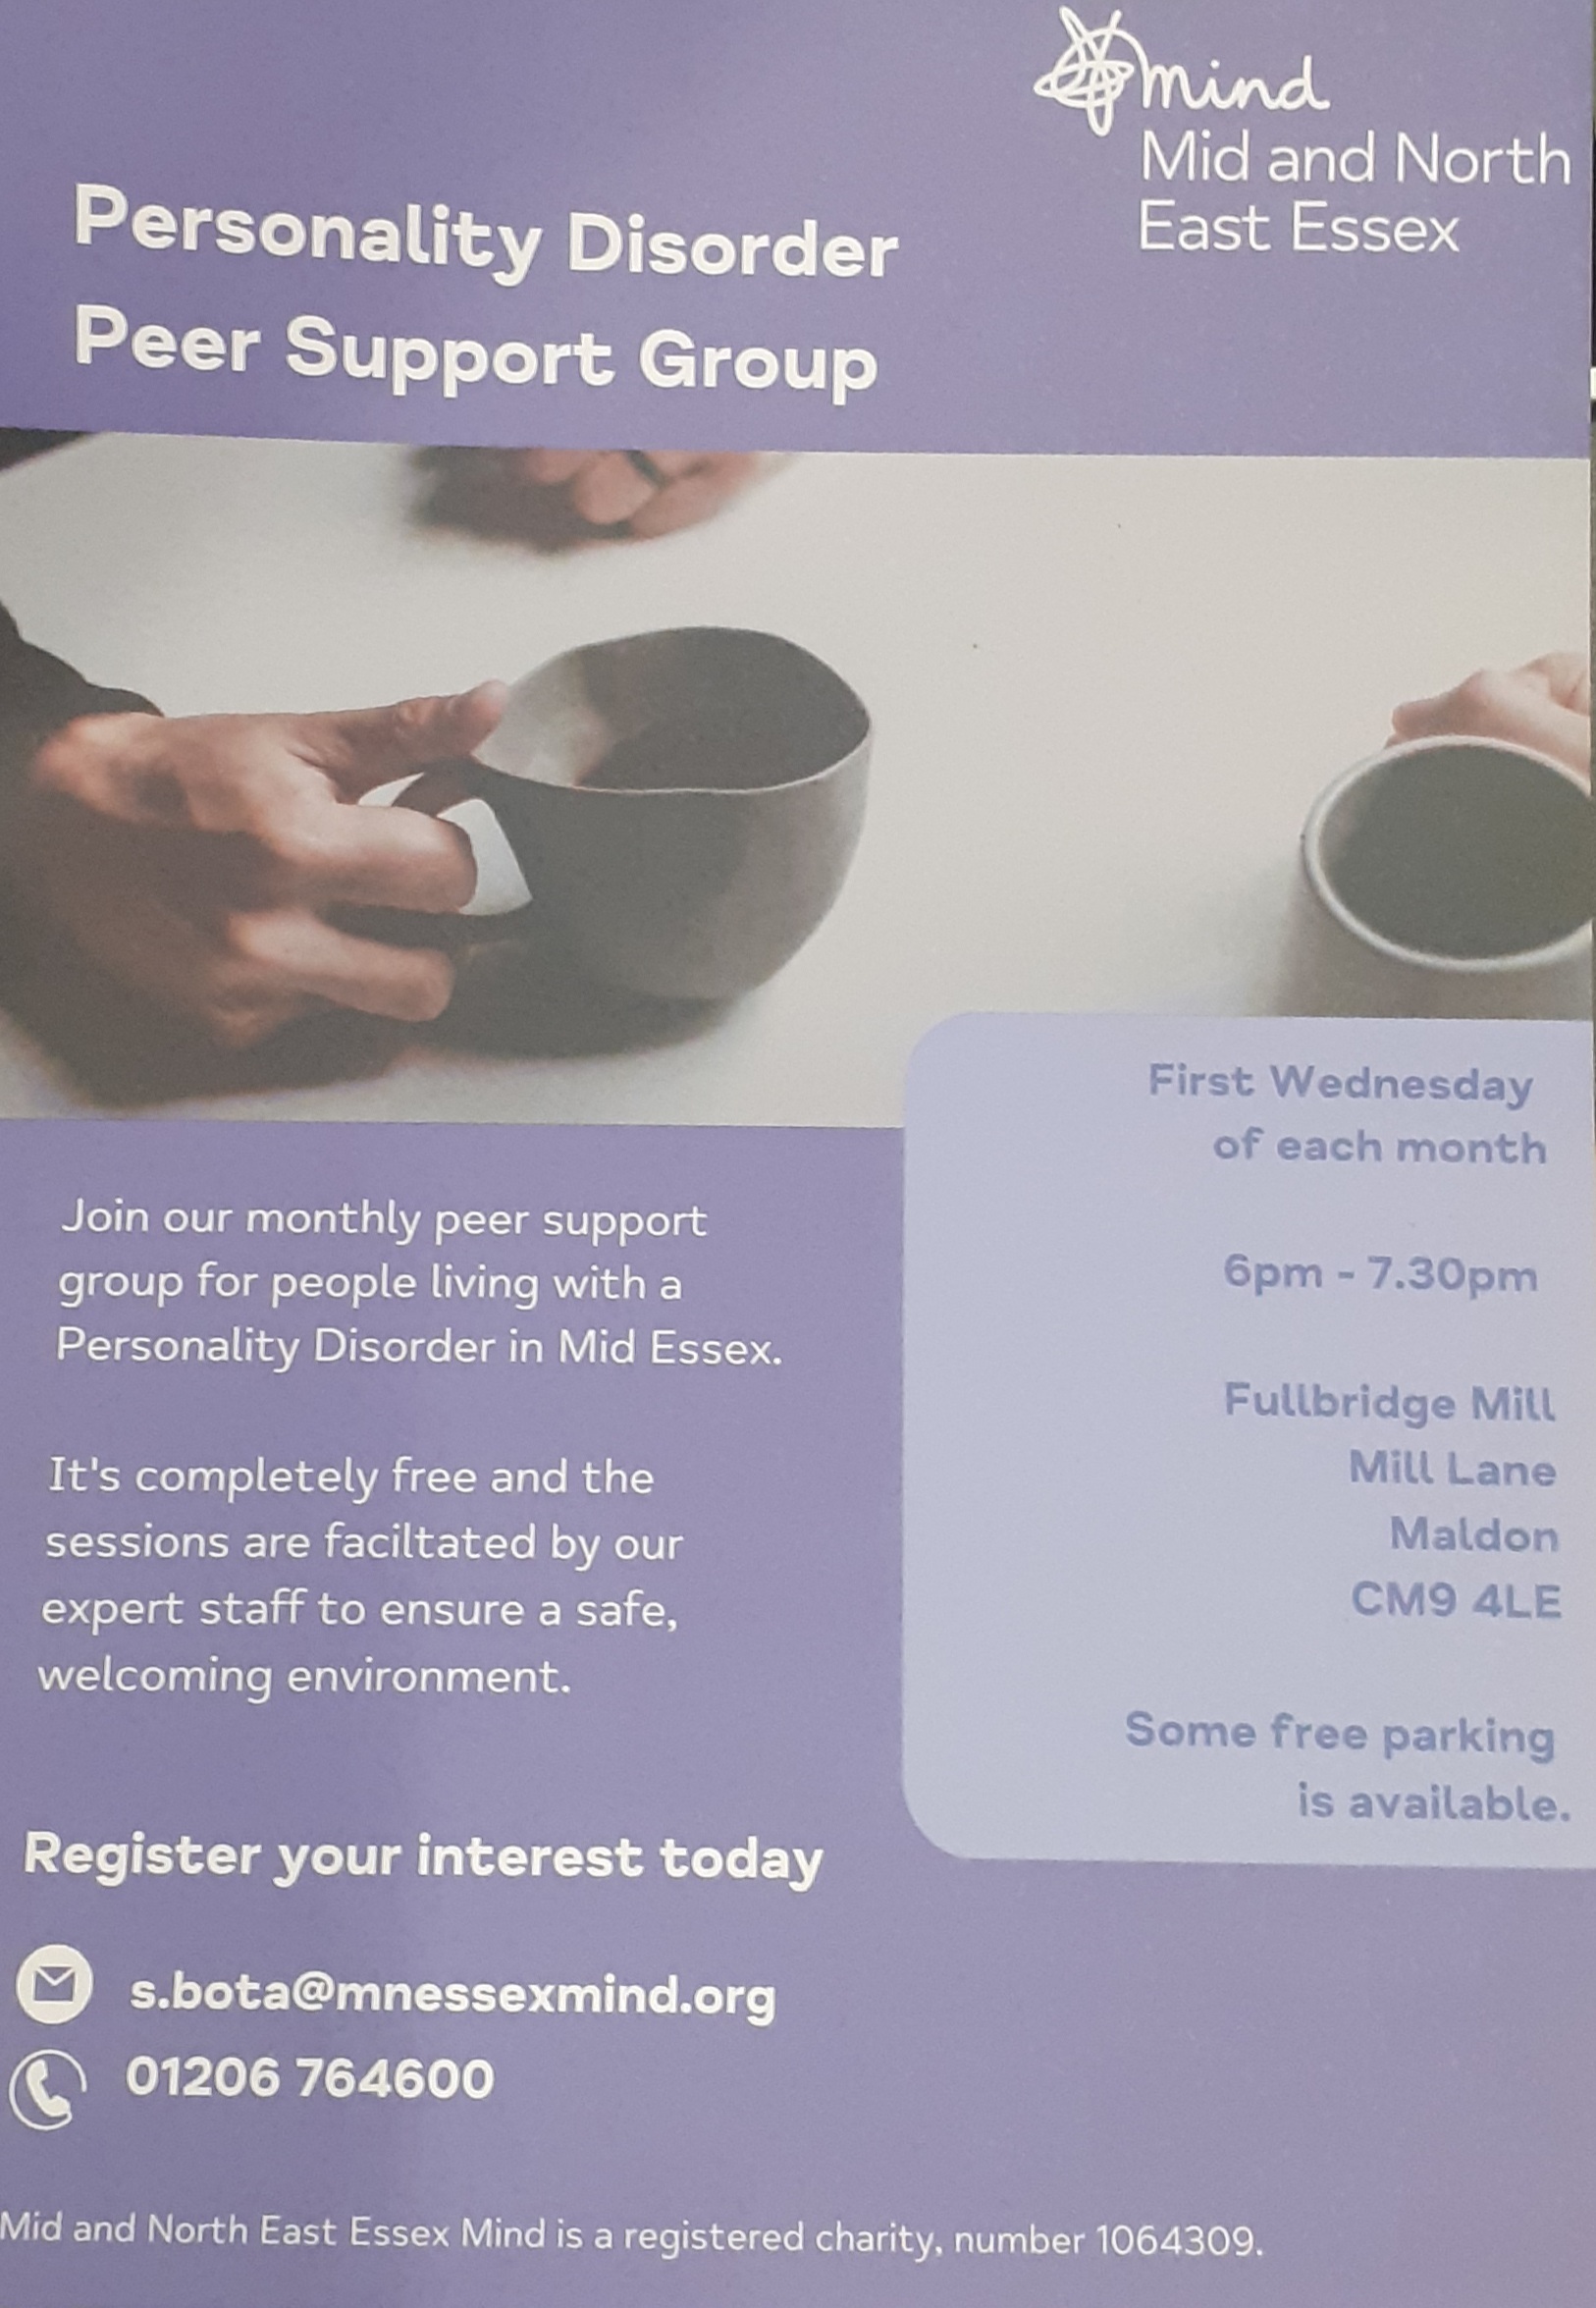 Peer Support Group